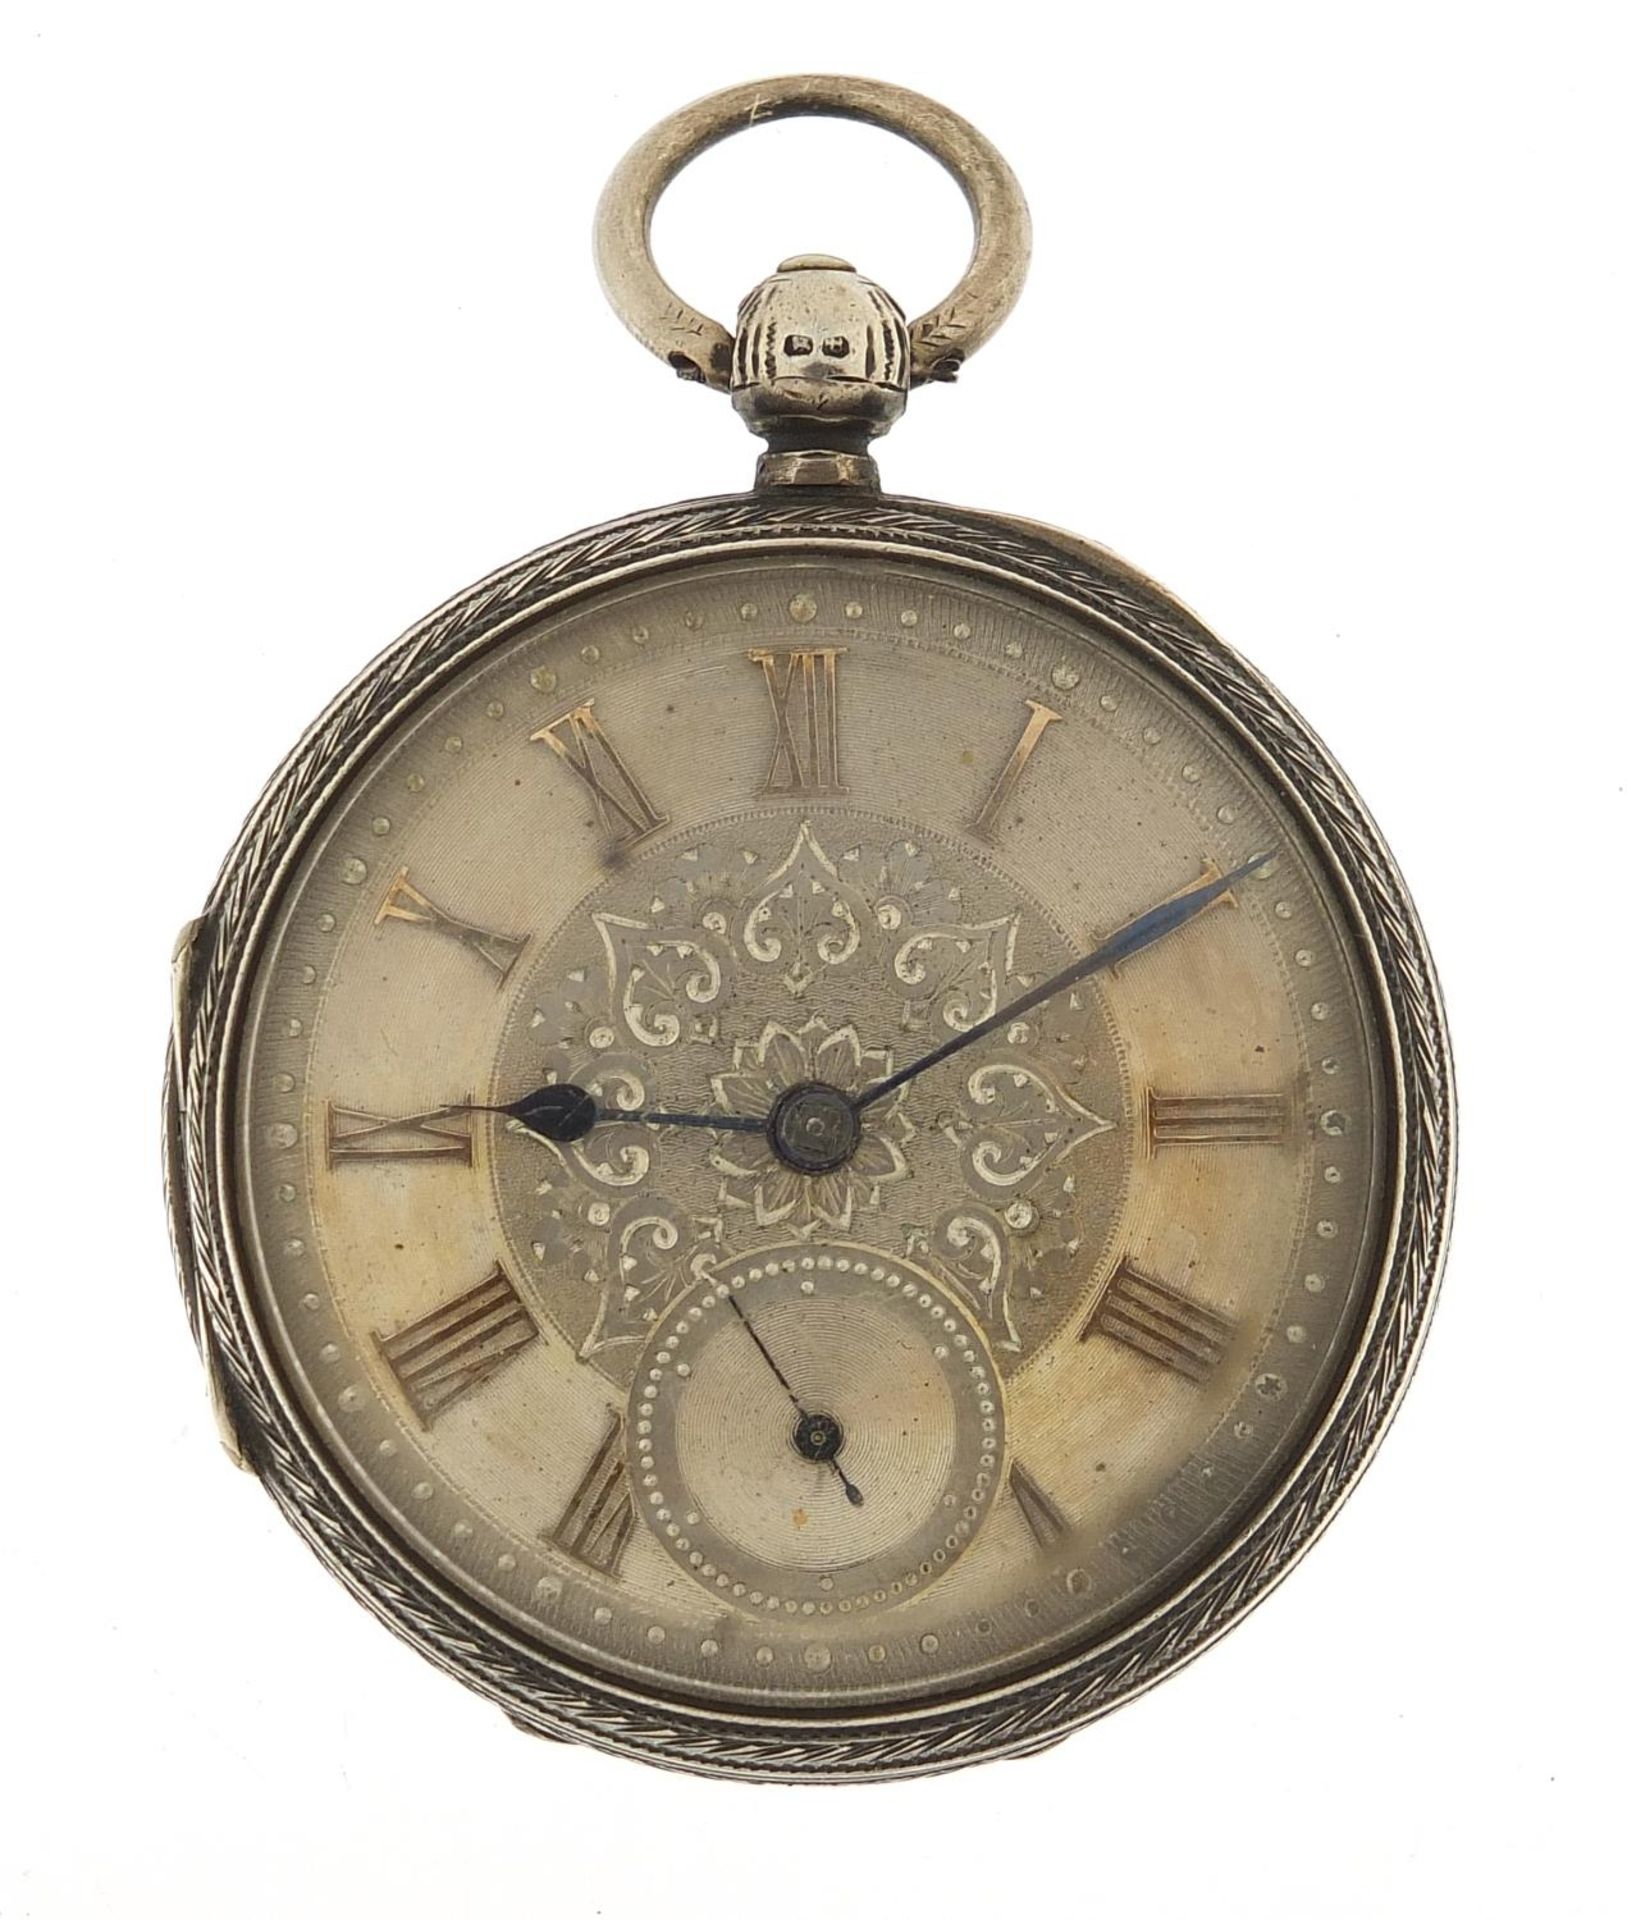 Victorian gentlemen's silver open face pocket watch with ornate silvered dial, the fusee movement